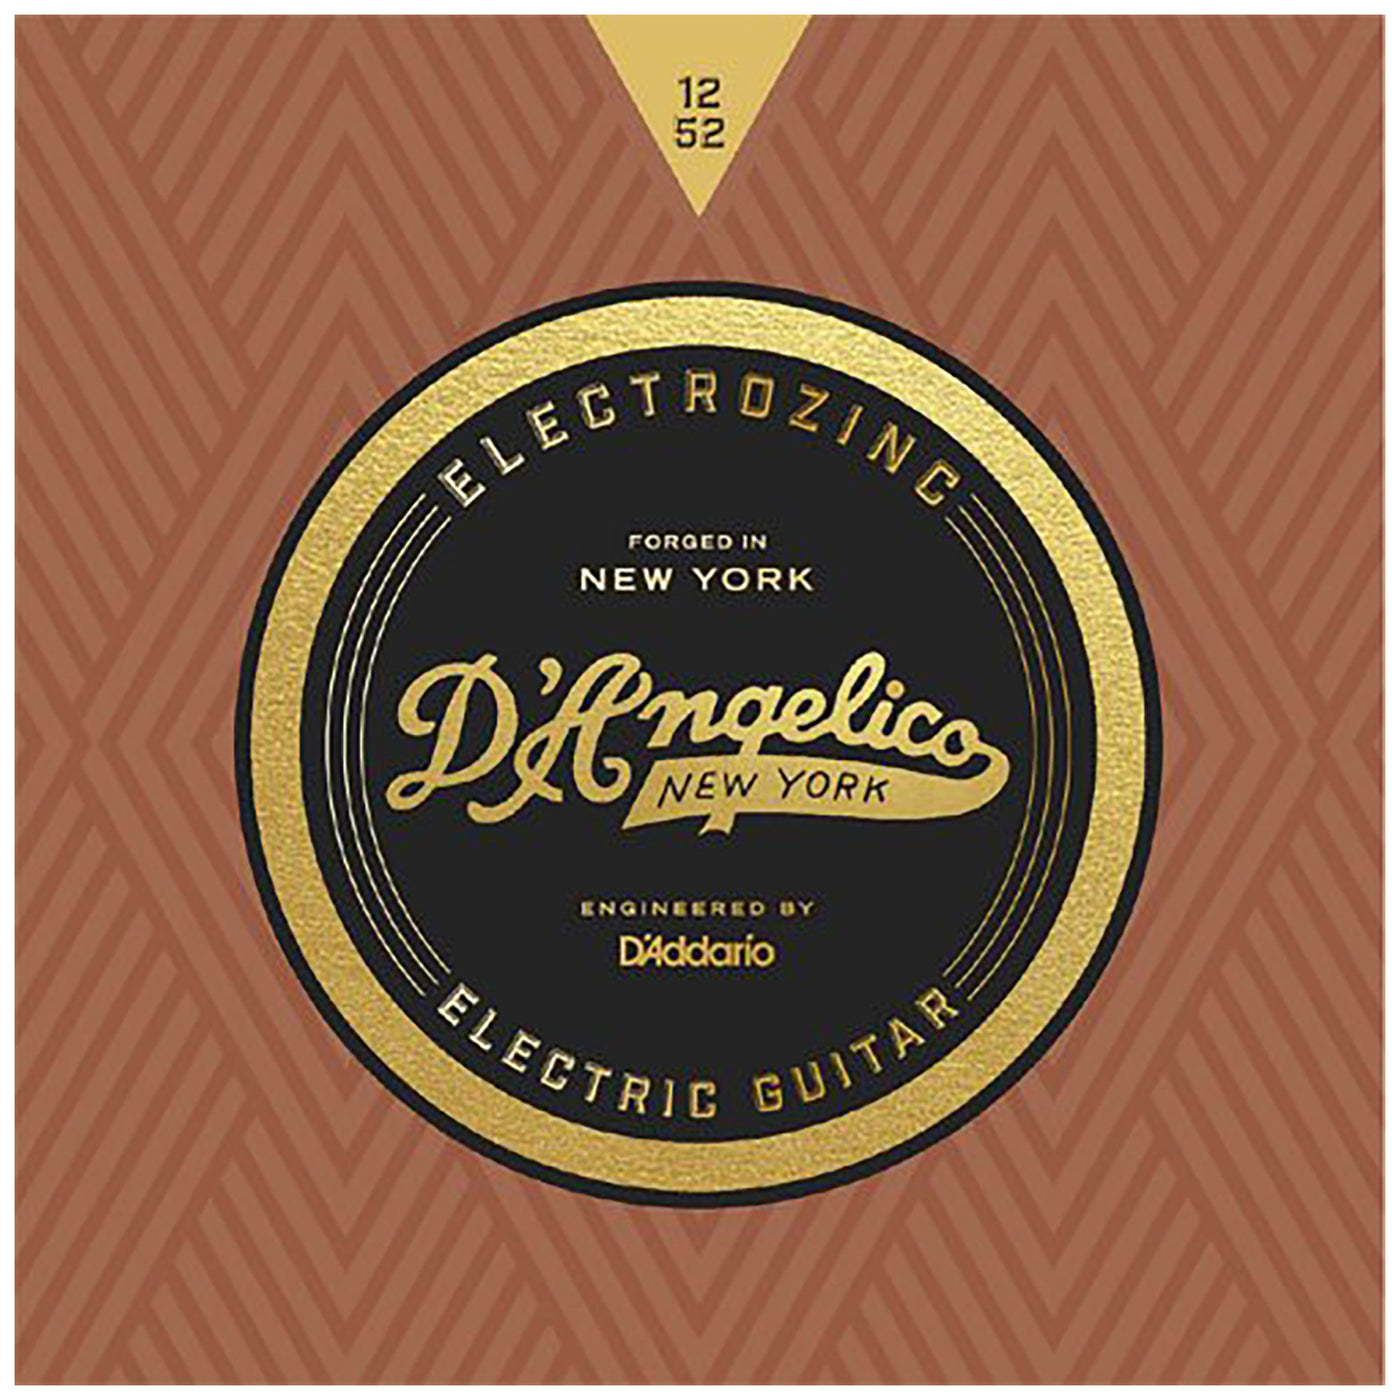 D'Angelico Electrozinc Strings Guitar Strings